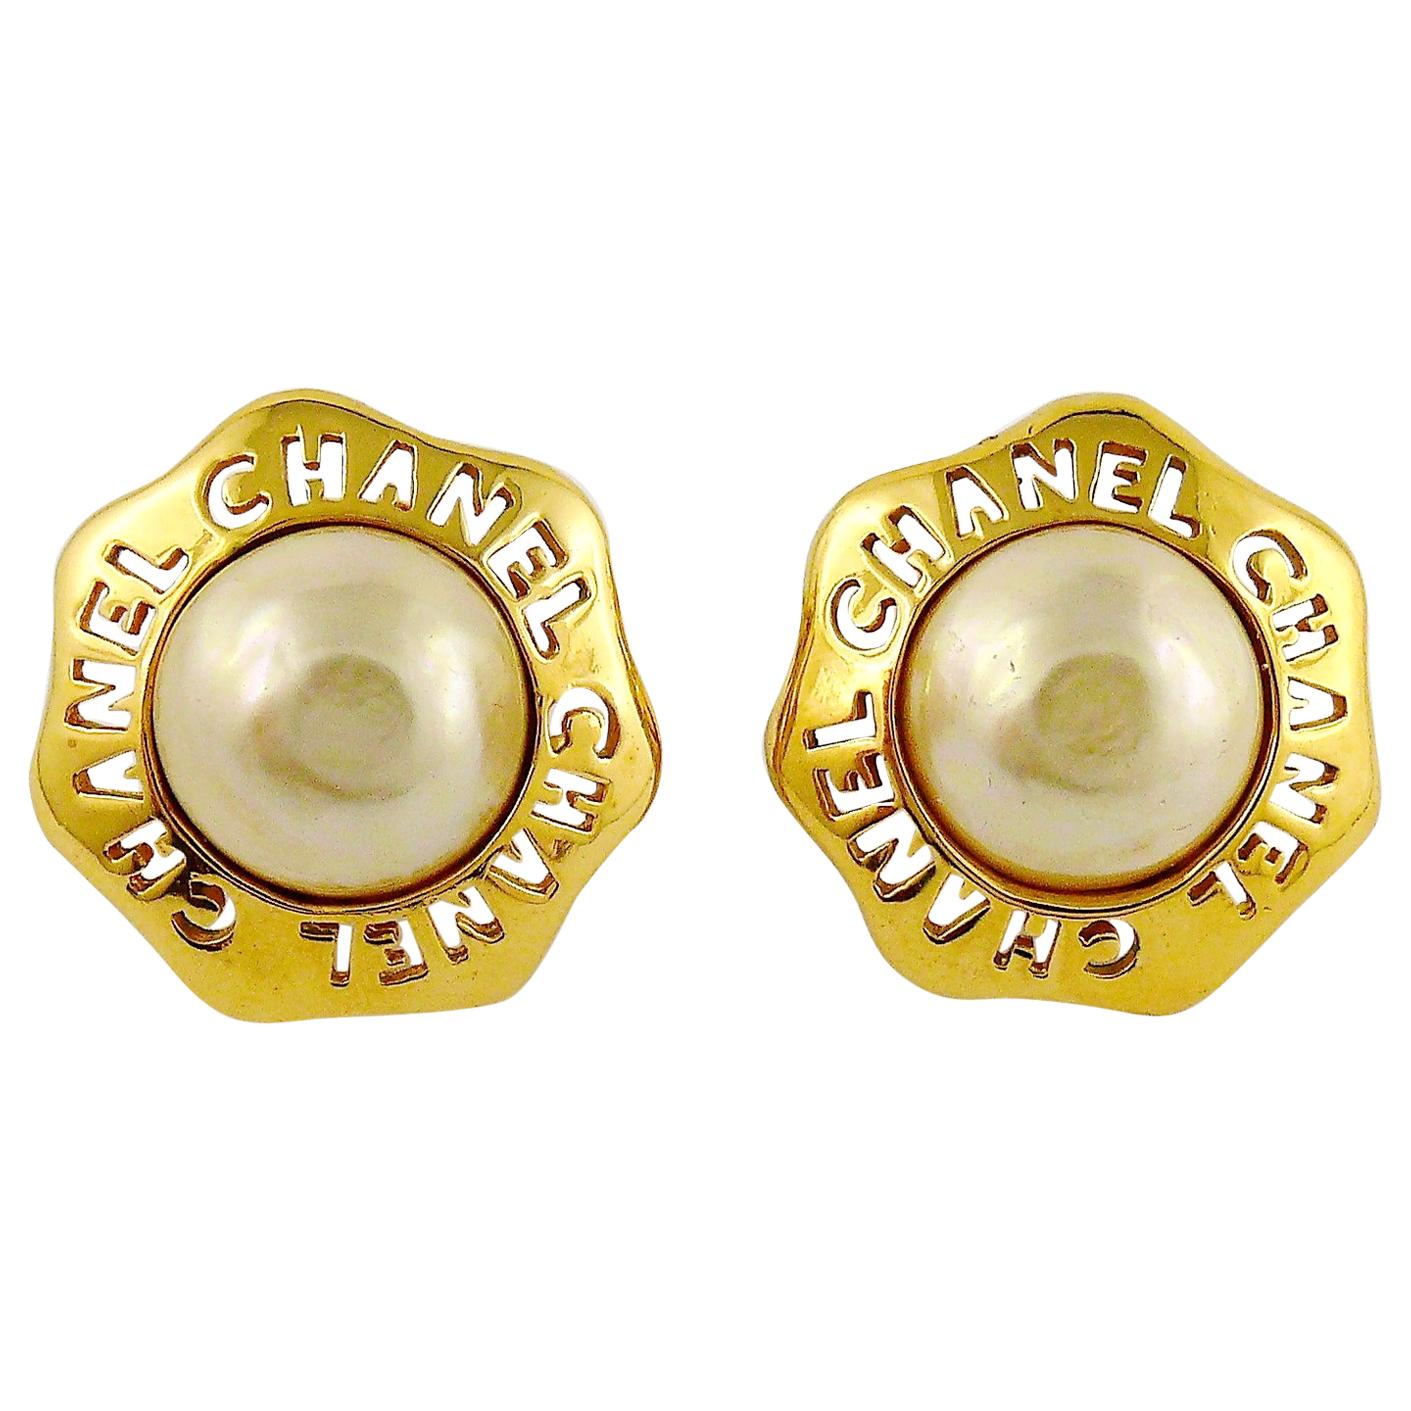 Chanel Vintage Cut Out Pearl Clip-On Earrings